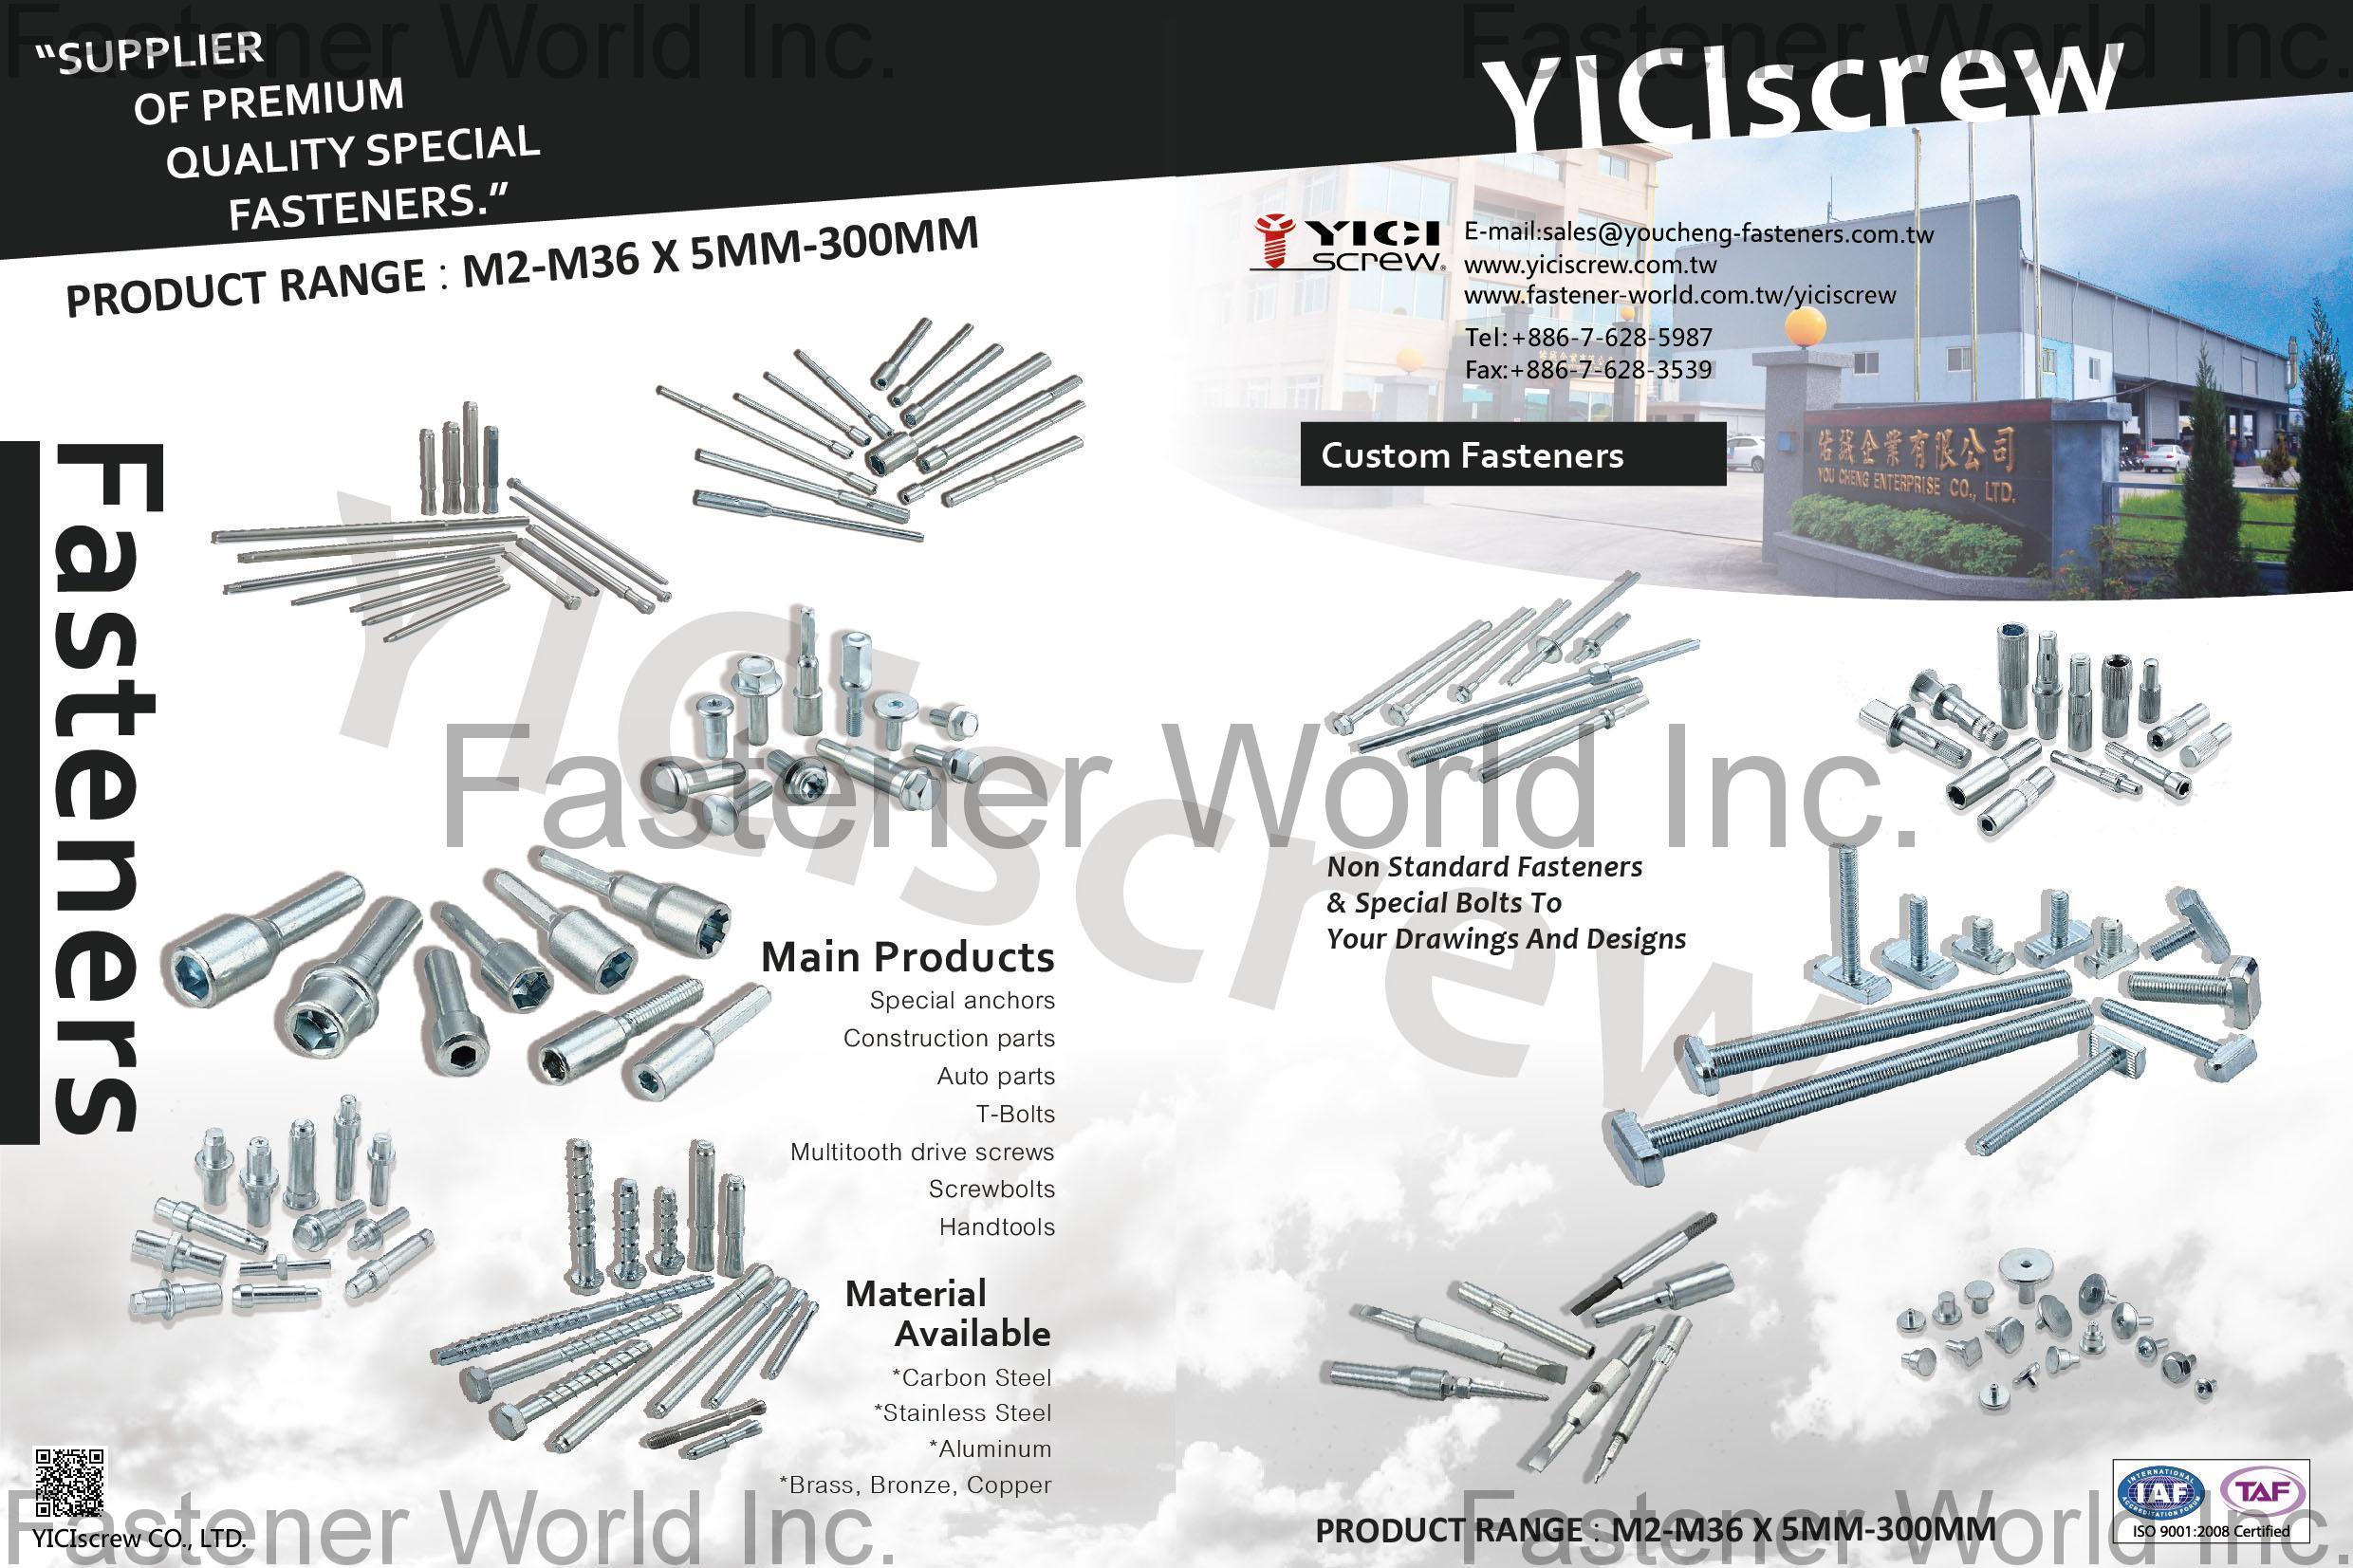 YICIscrew CO., LTD. , Special Anchors, Construction Parts, Auto Parts, T-Bolts, Multitooth Drive Screws, Screwbolts, Handtools , Construction Fasteners